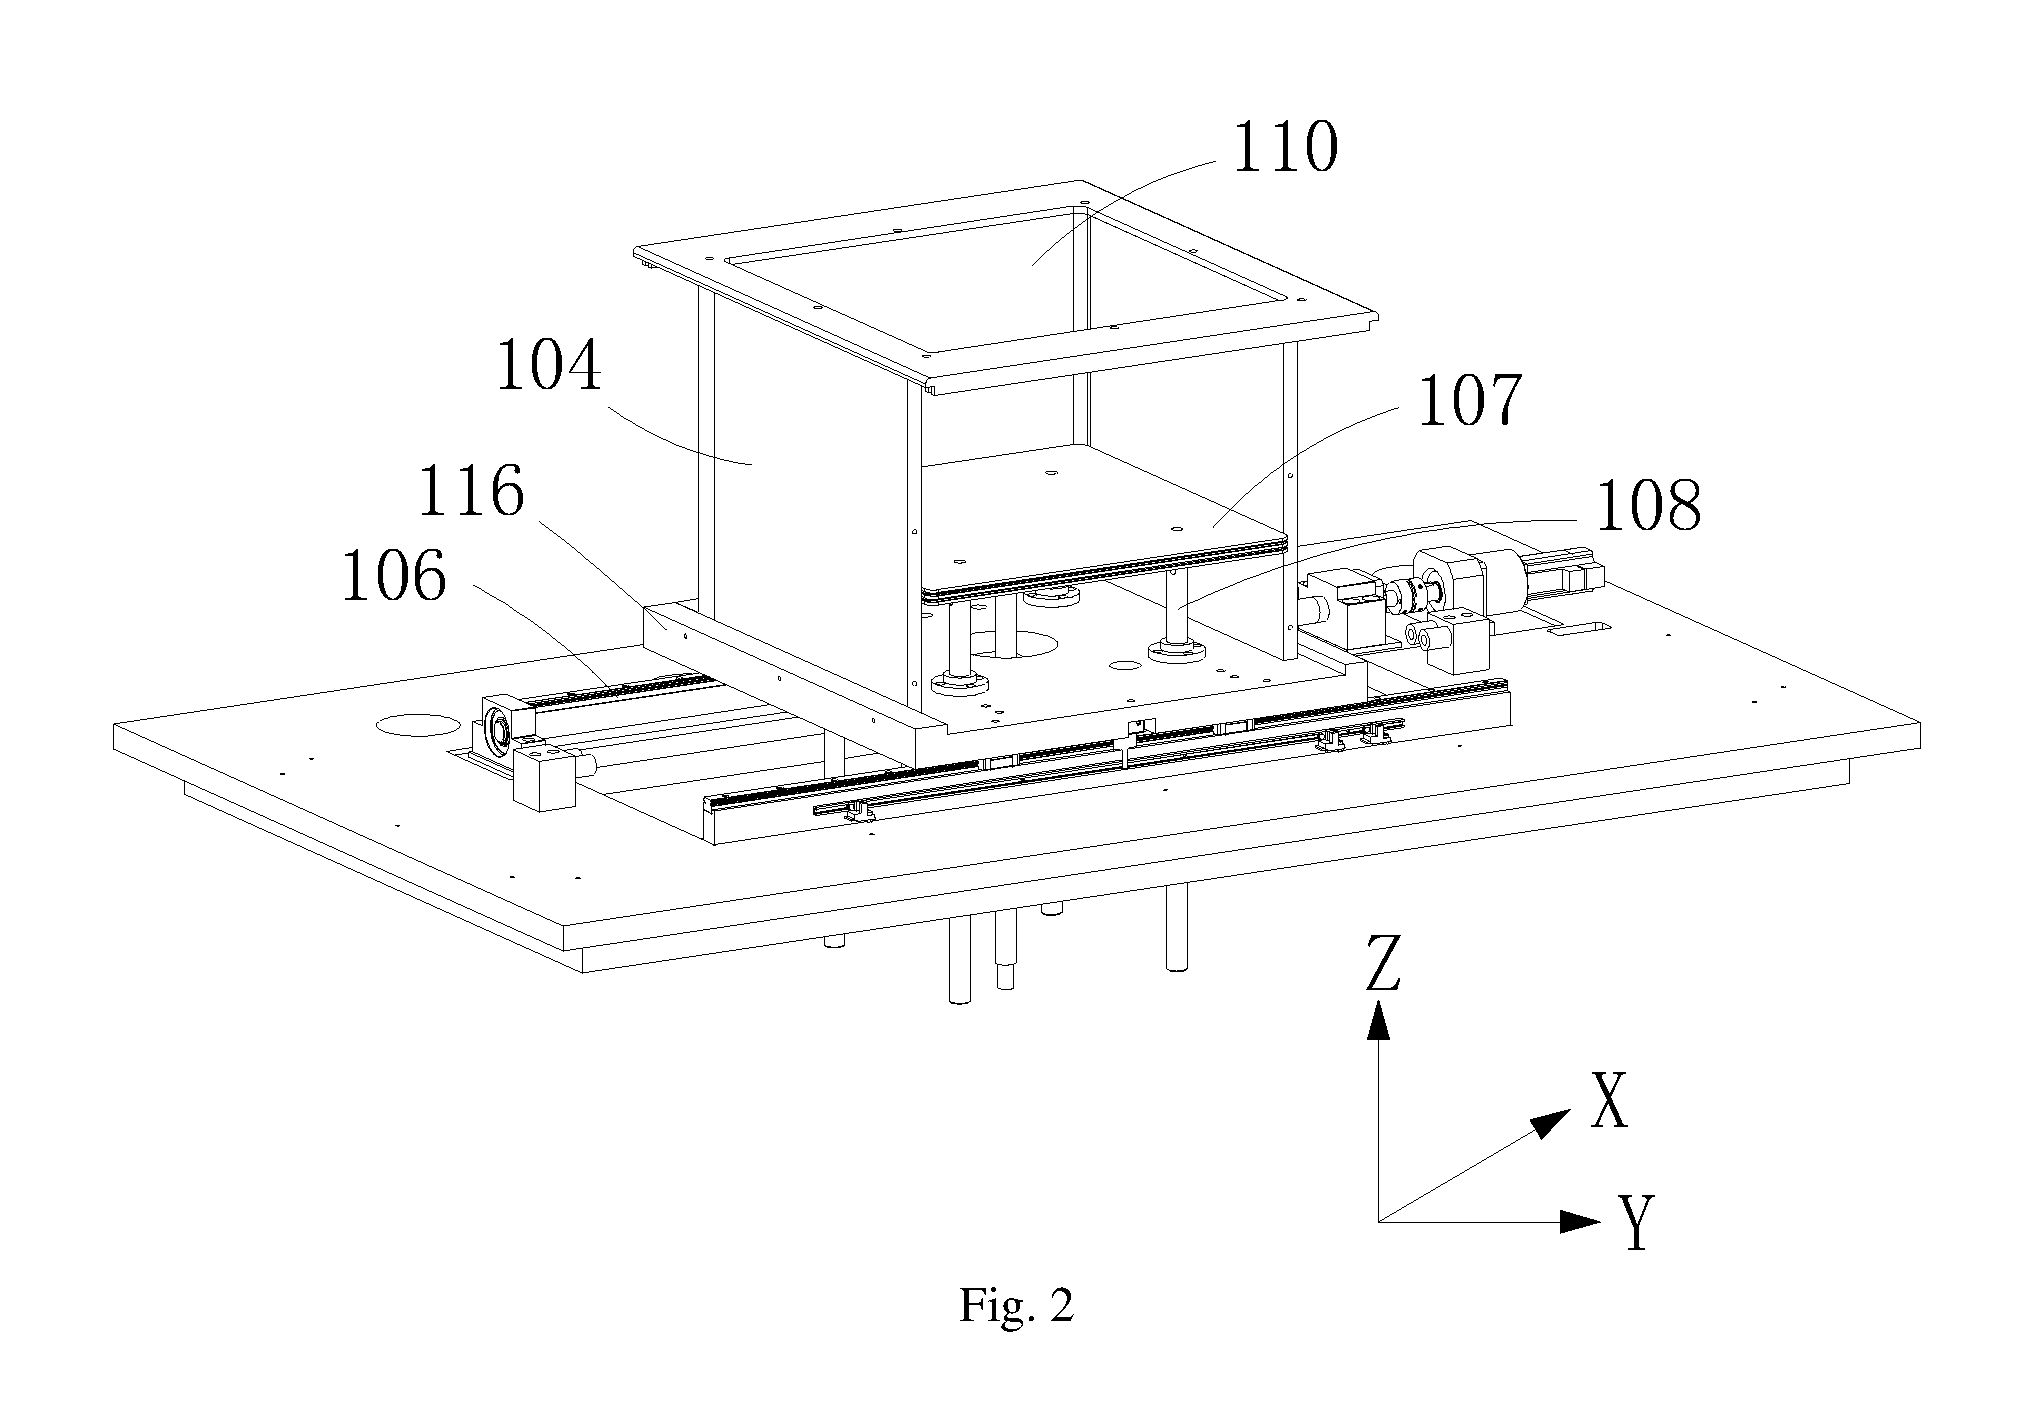 Electron beam melting and cutting composite 3D printing apparatus